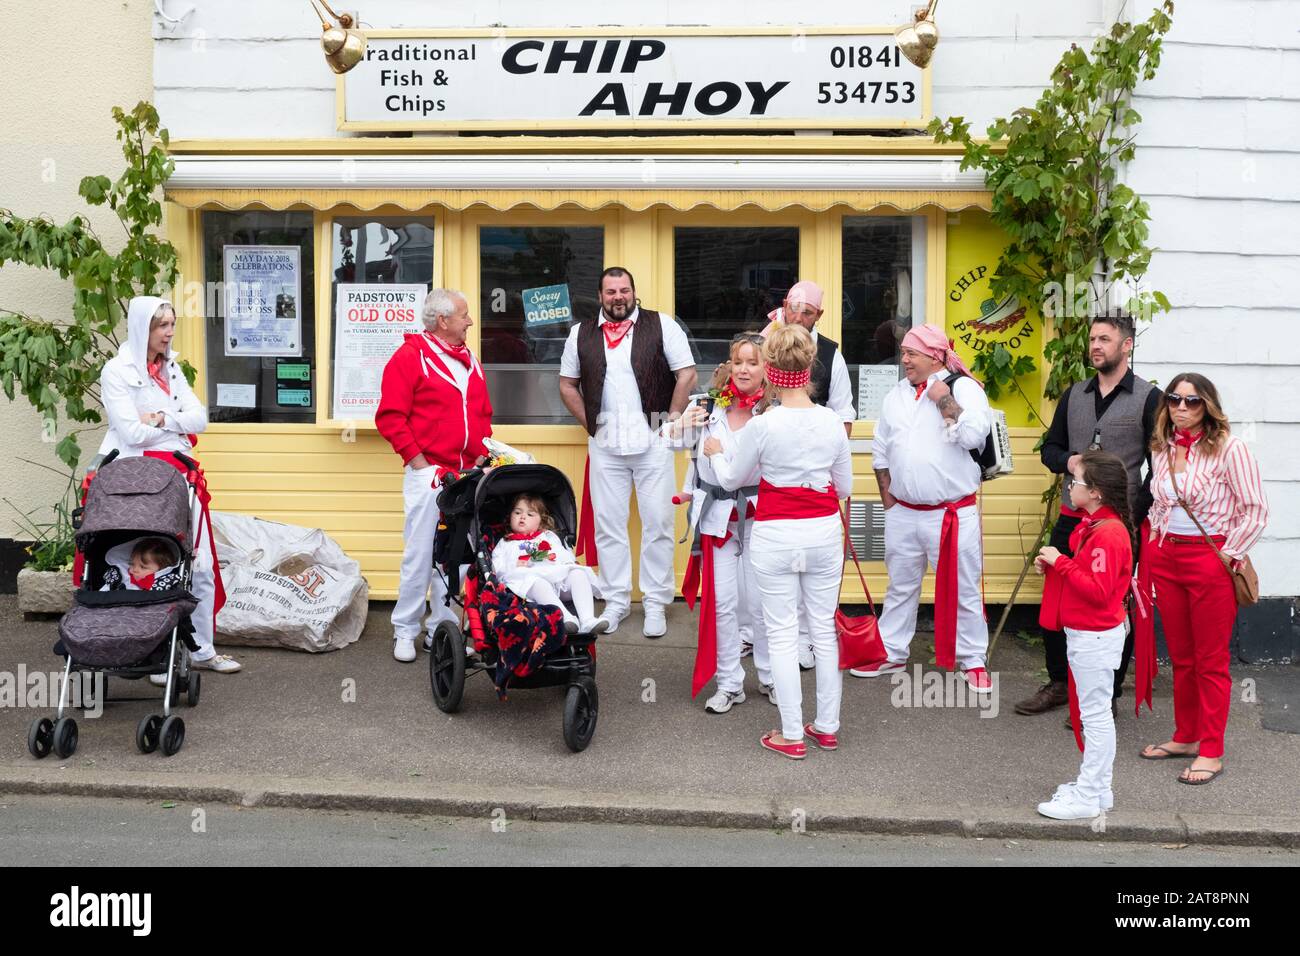 Family wearing red ribbons outside the Chip Ahoy fish and chips shop during the Obby Oss celebrations, Padstow, Cornwall, UK Stock Photo